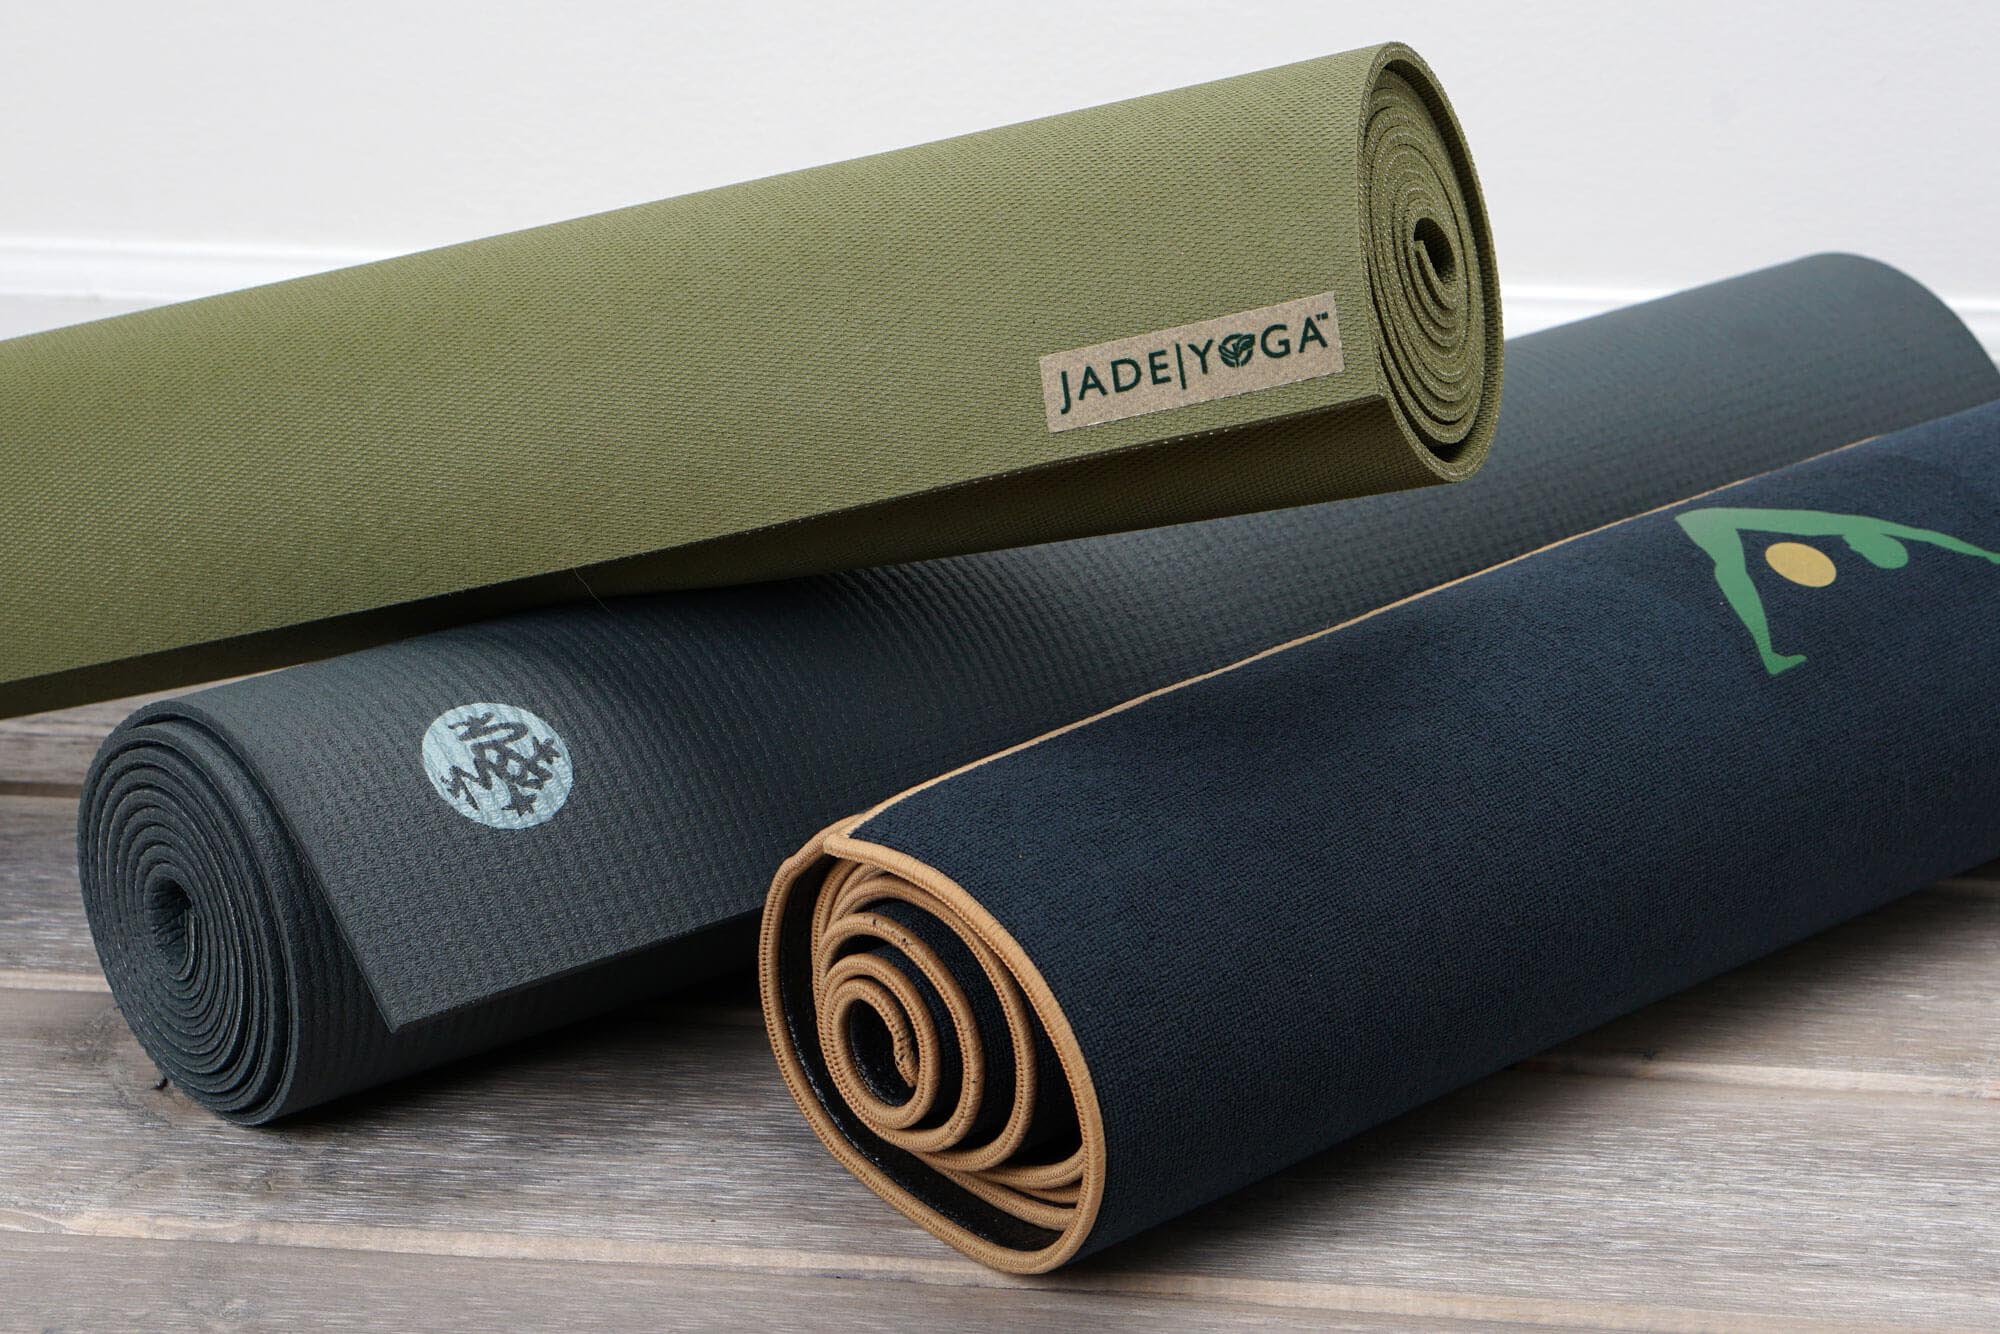 Best Yoga Mat for Hot Yoga, According to Experts in 2023